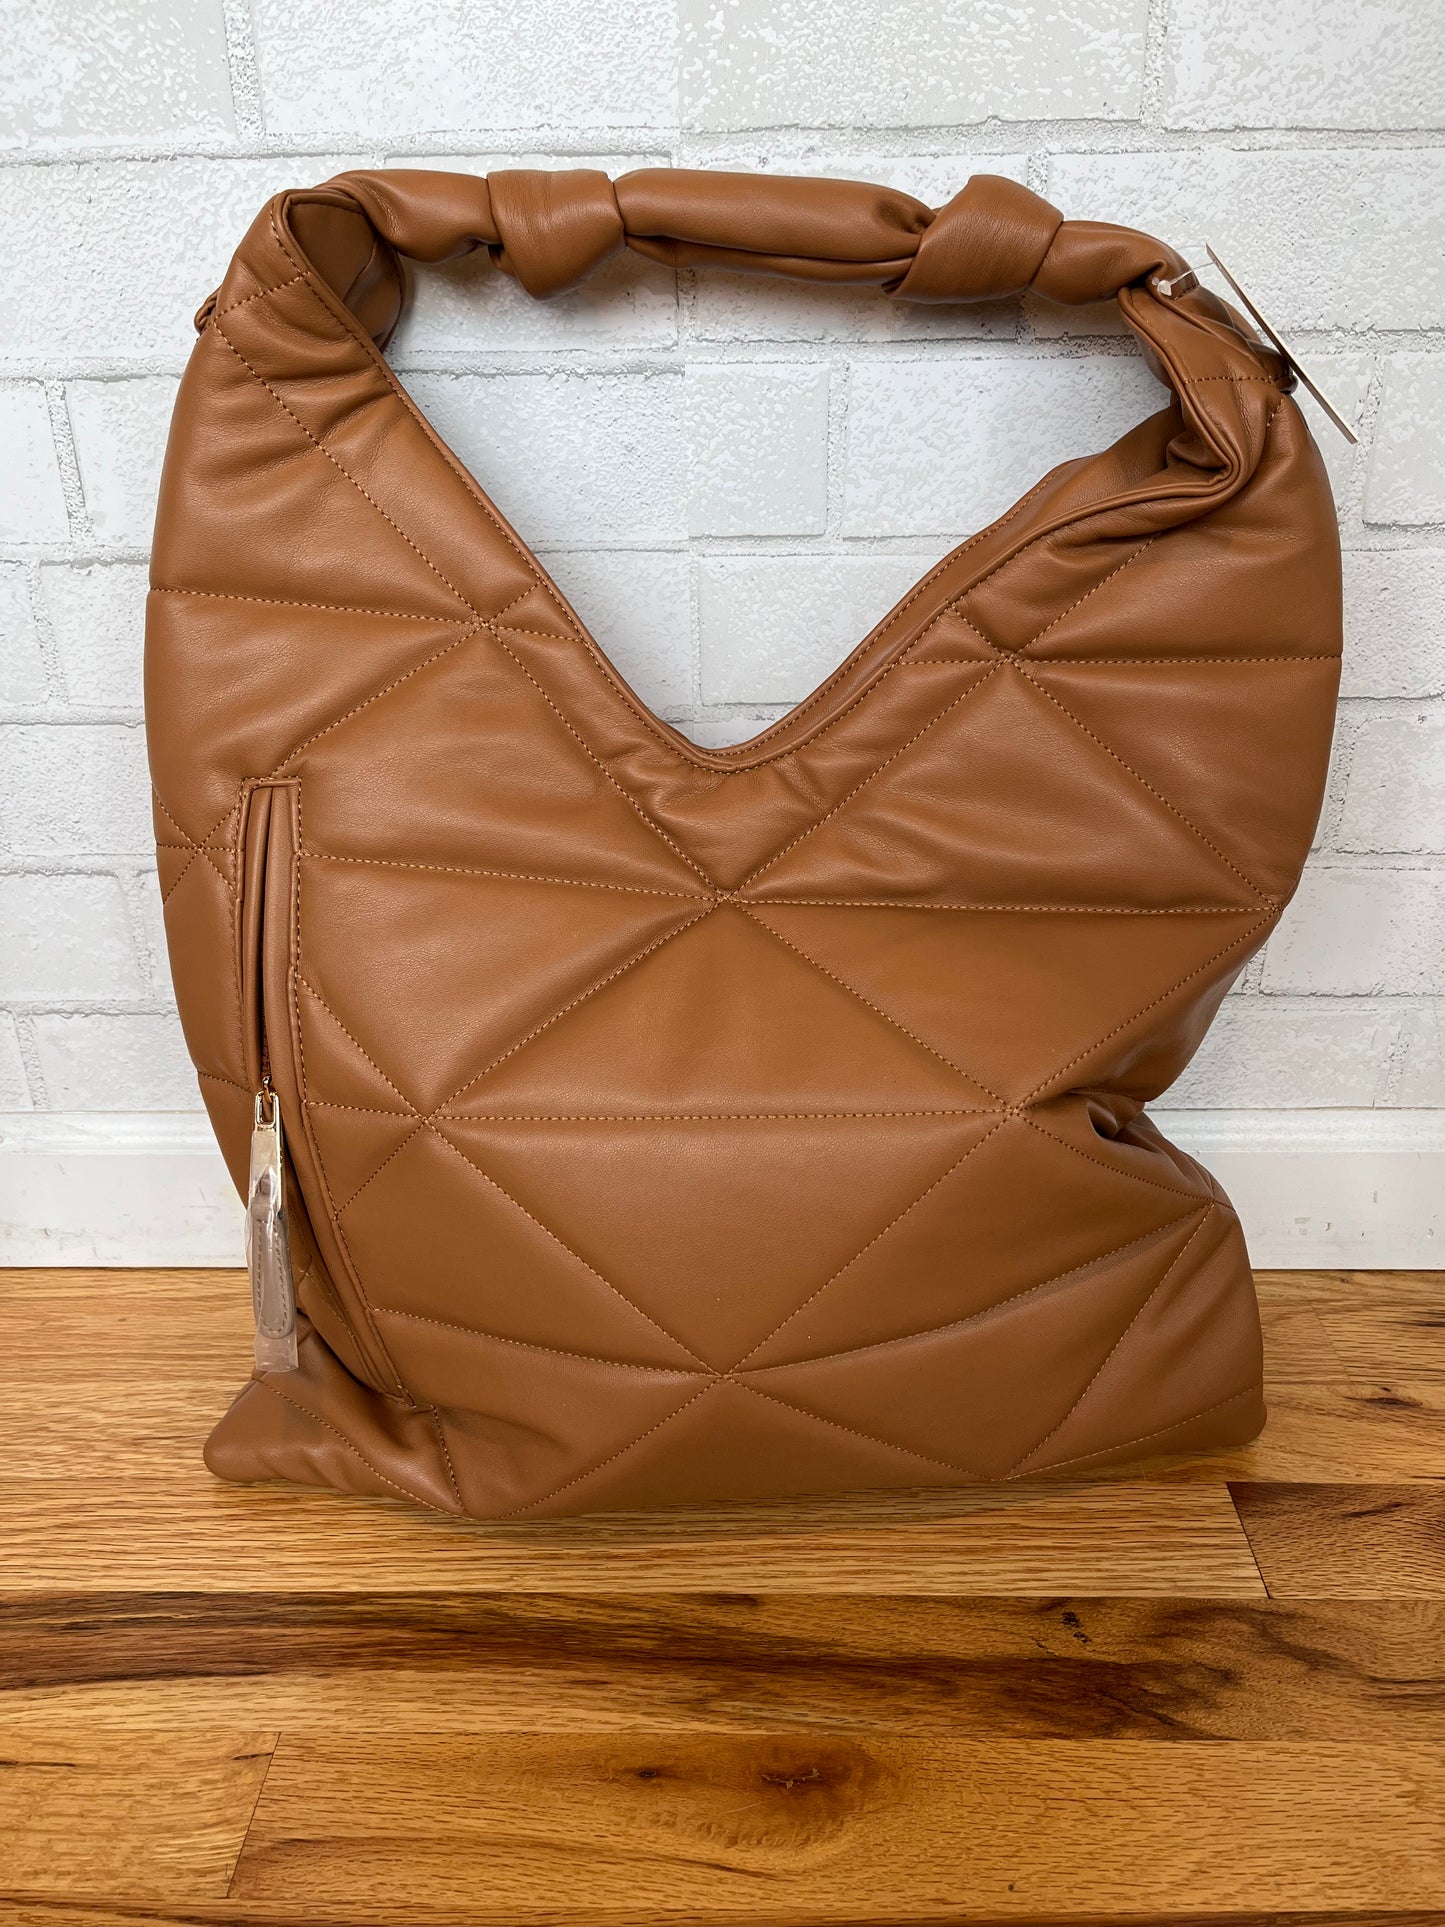 A hobo bag with a knots on the handle. Lots of room for your goodies!